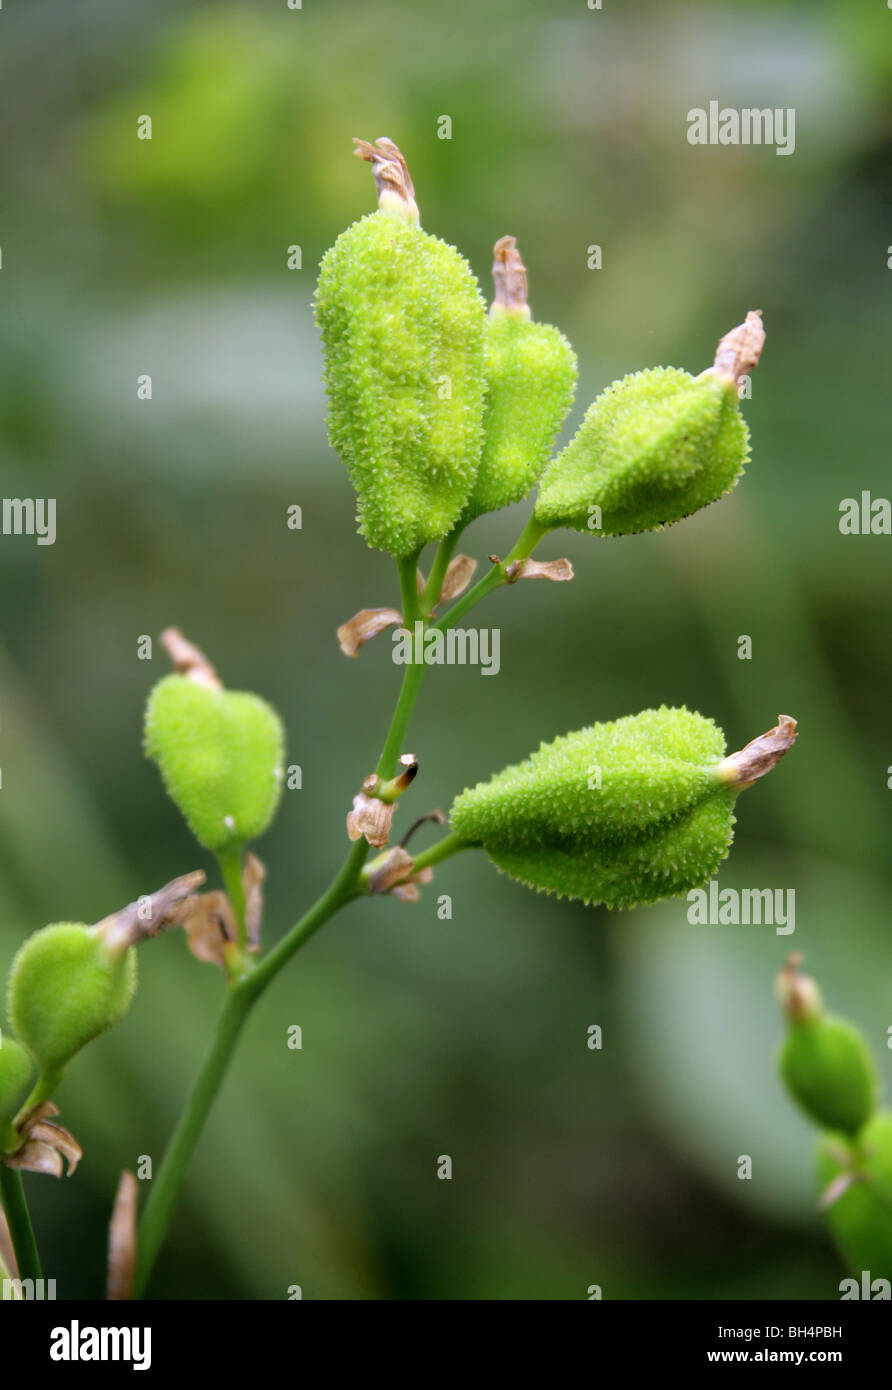 Seed Pods of the Edible Canna Lily, English Shot, Queensland Arrowroot or Achira, Canna indica, Cannaceae.  Tropical America. Stock Photo